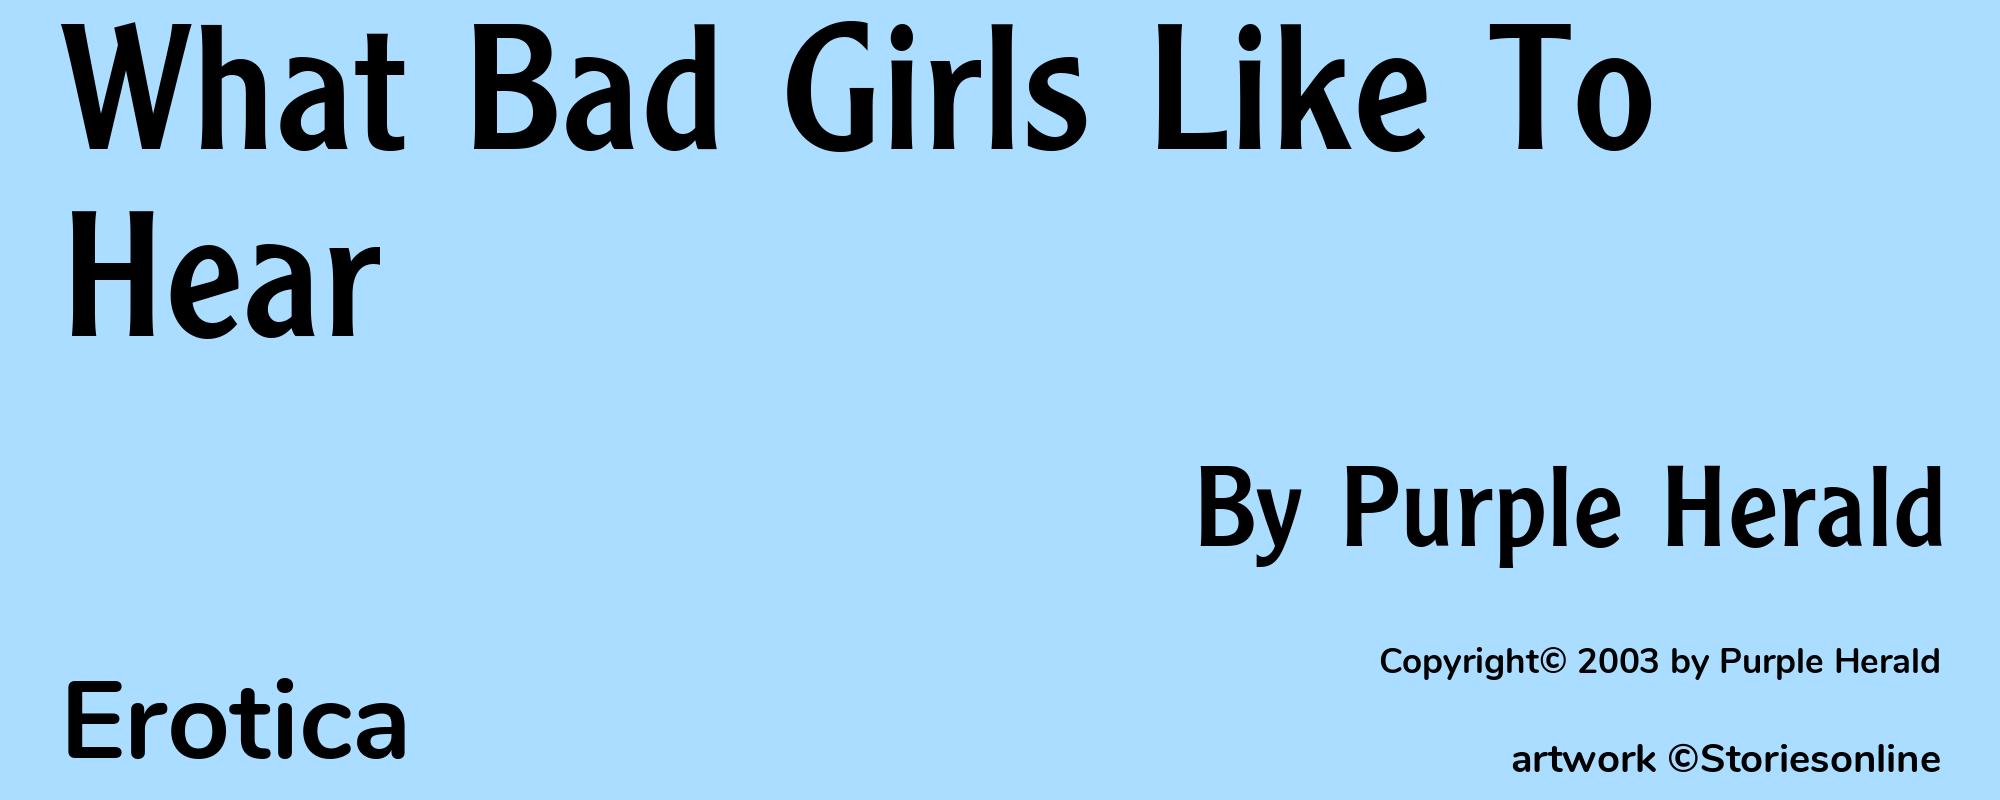 What Bad Girls Like To Hear - Cover